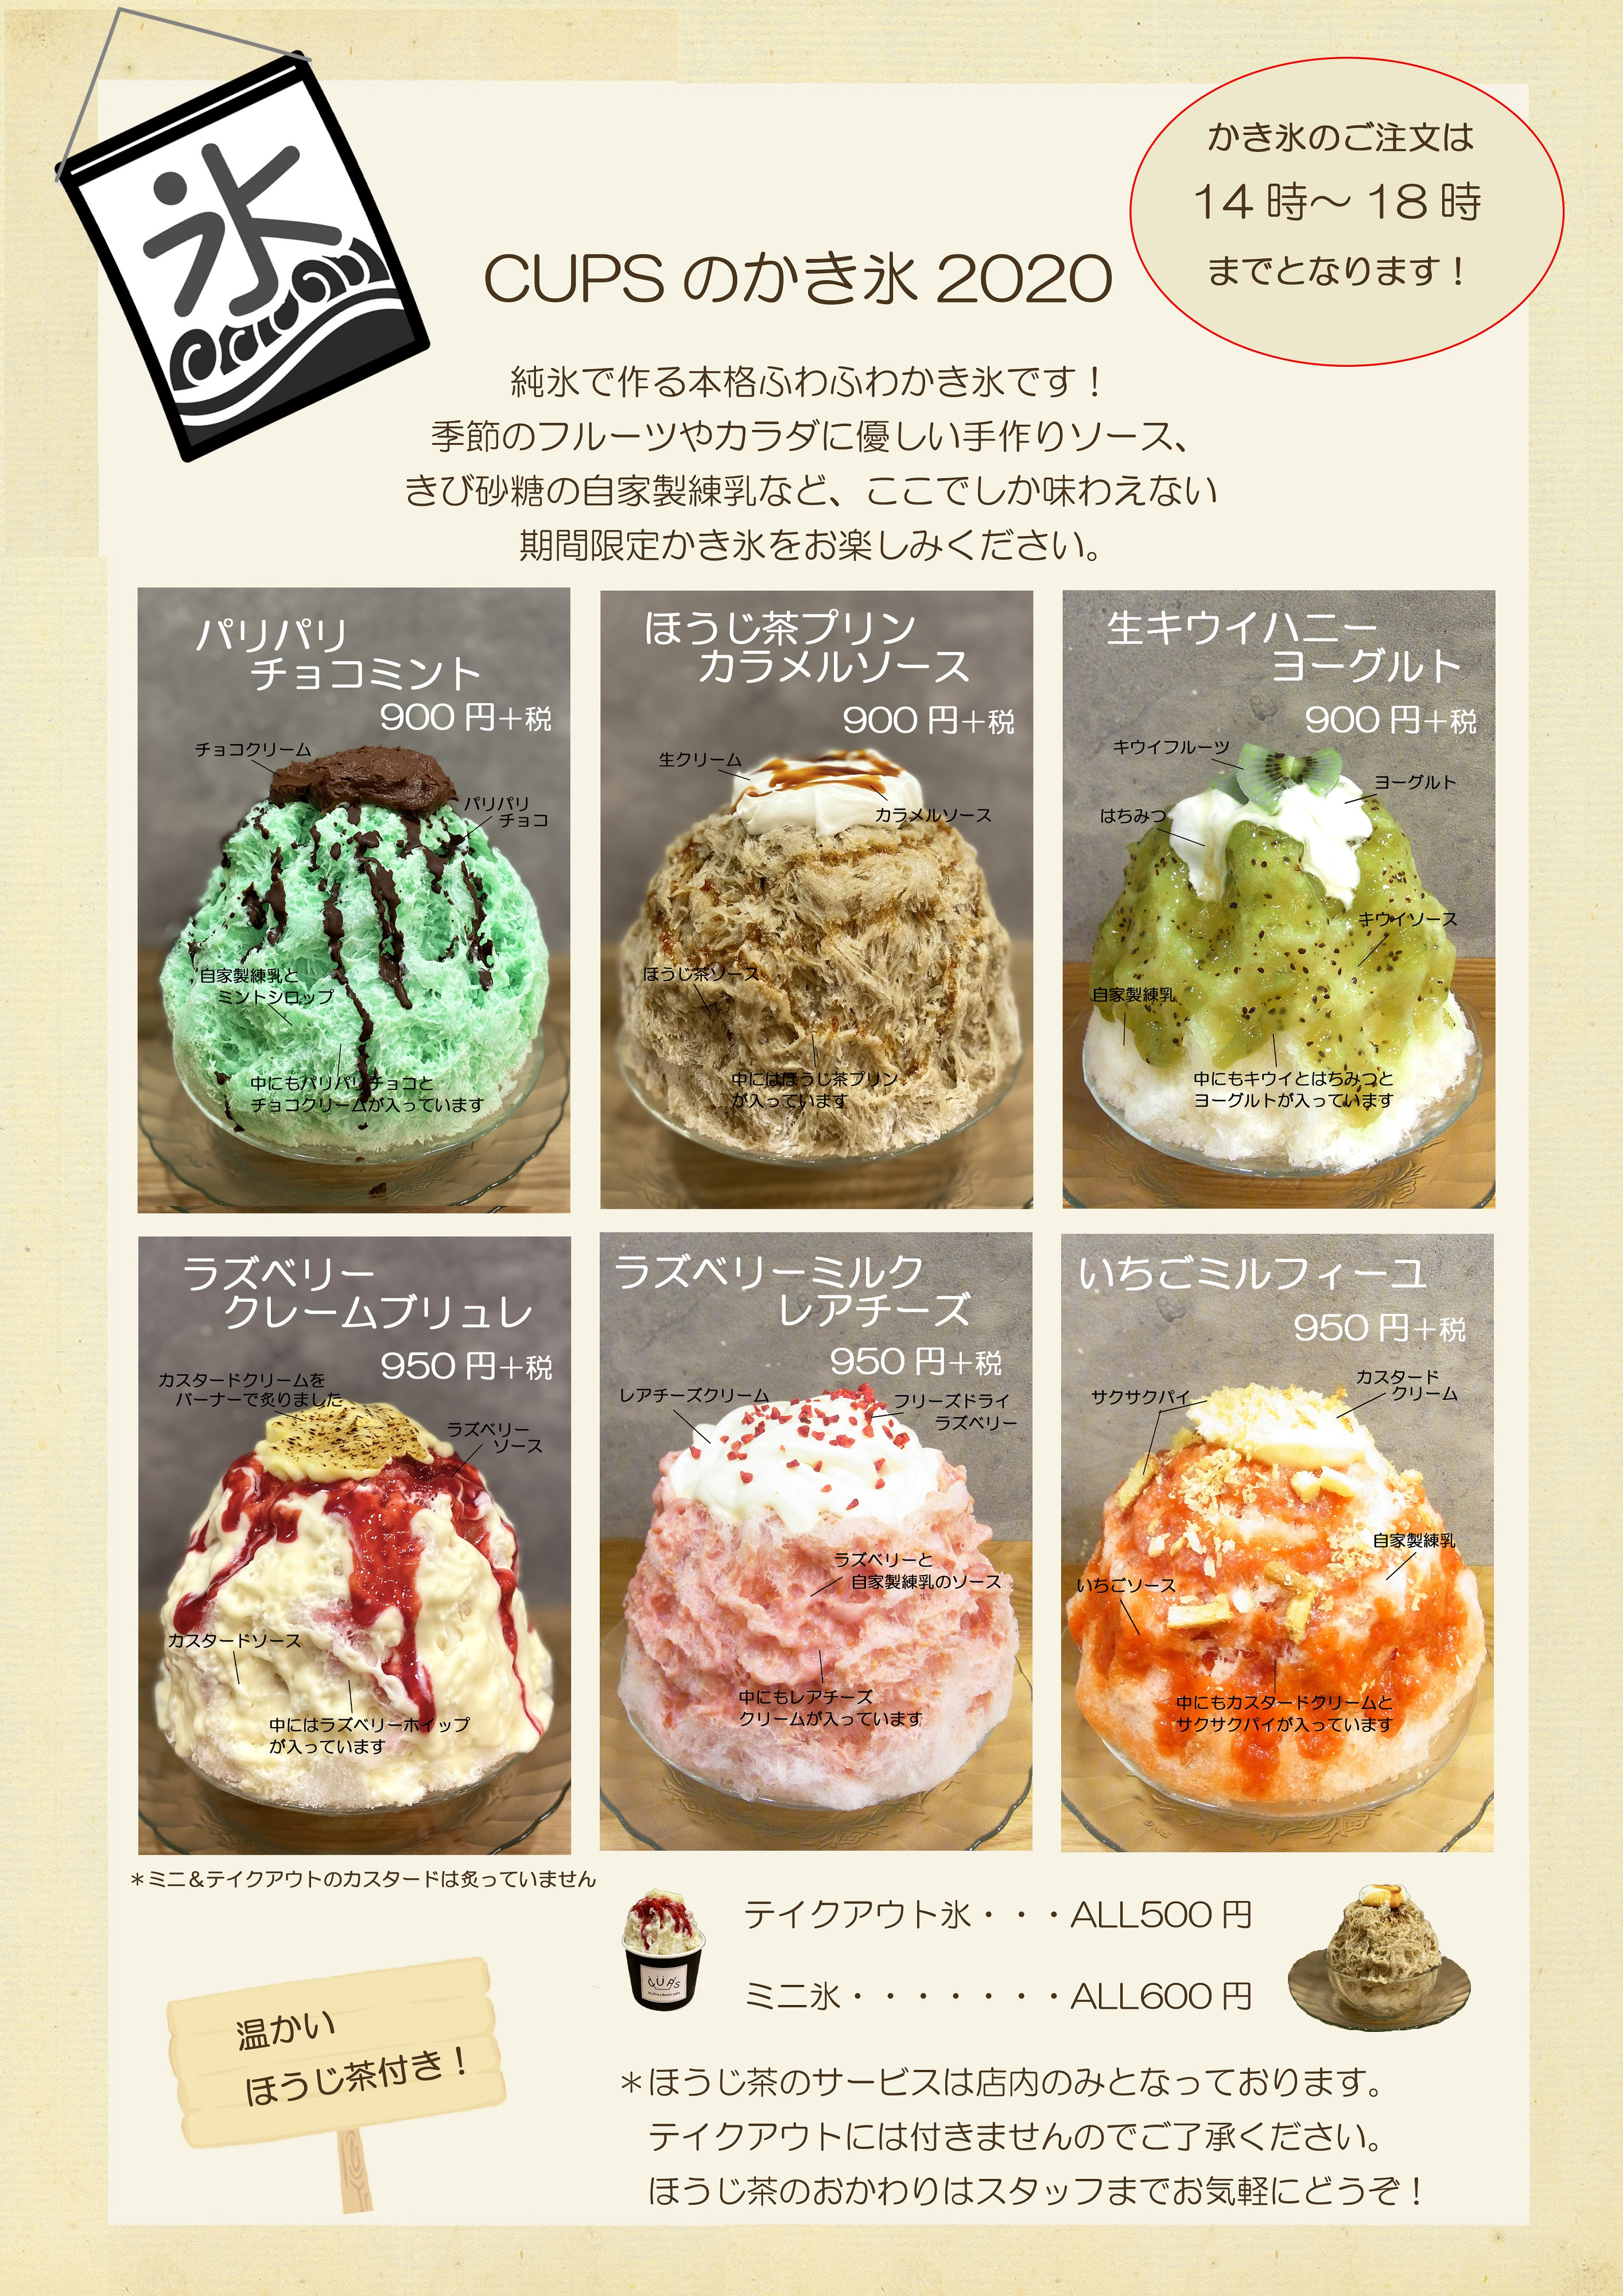 New かき氷メニュー Muffin Bowls Cafe Cups